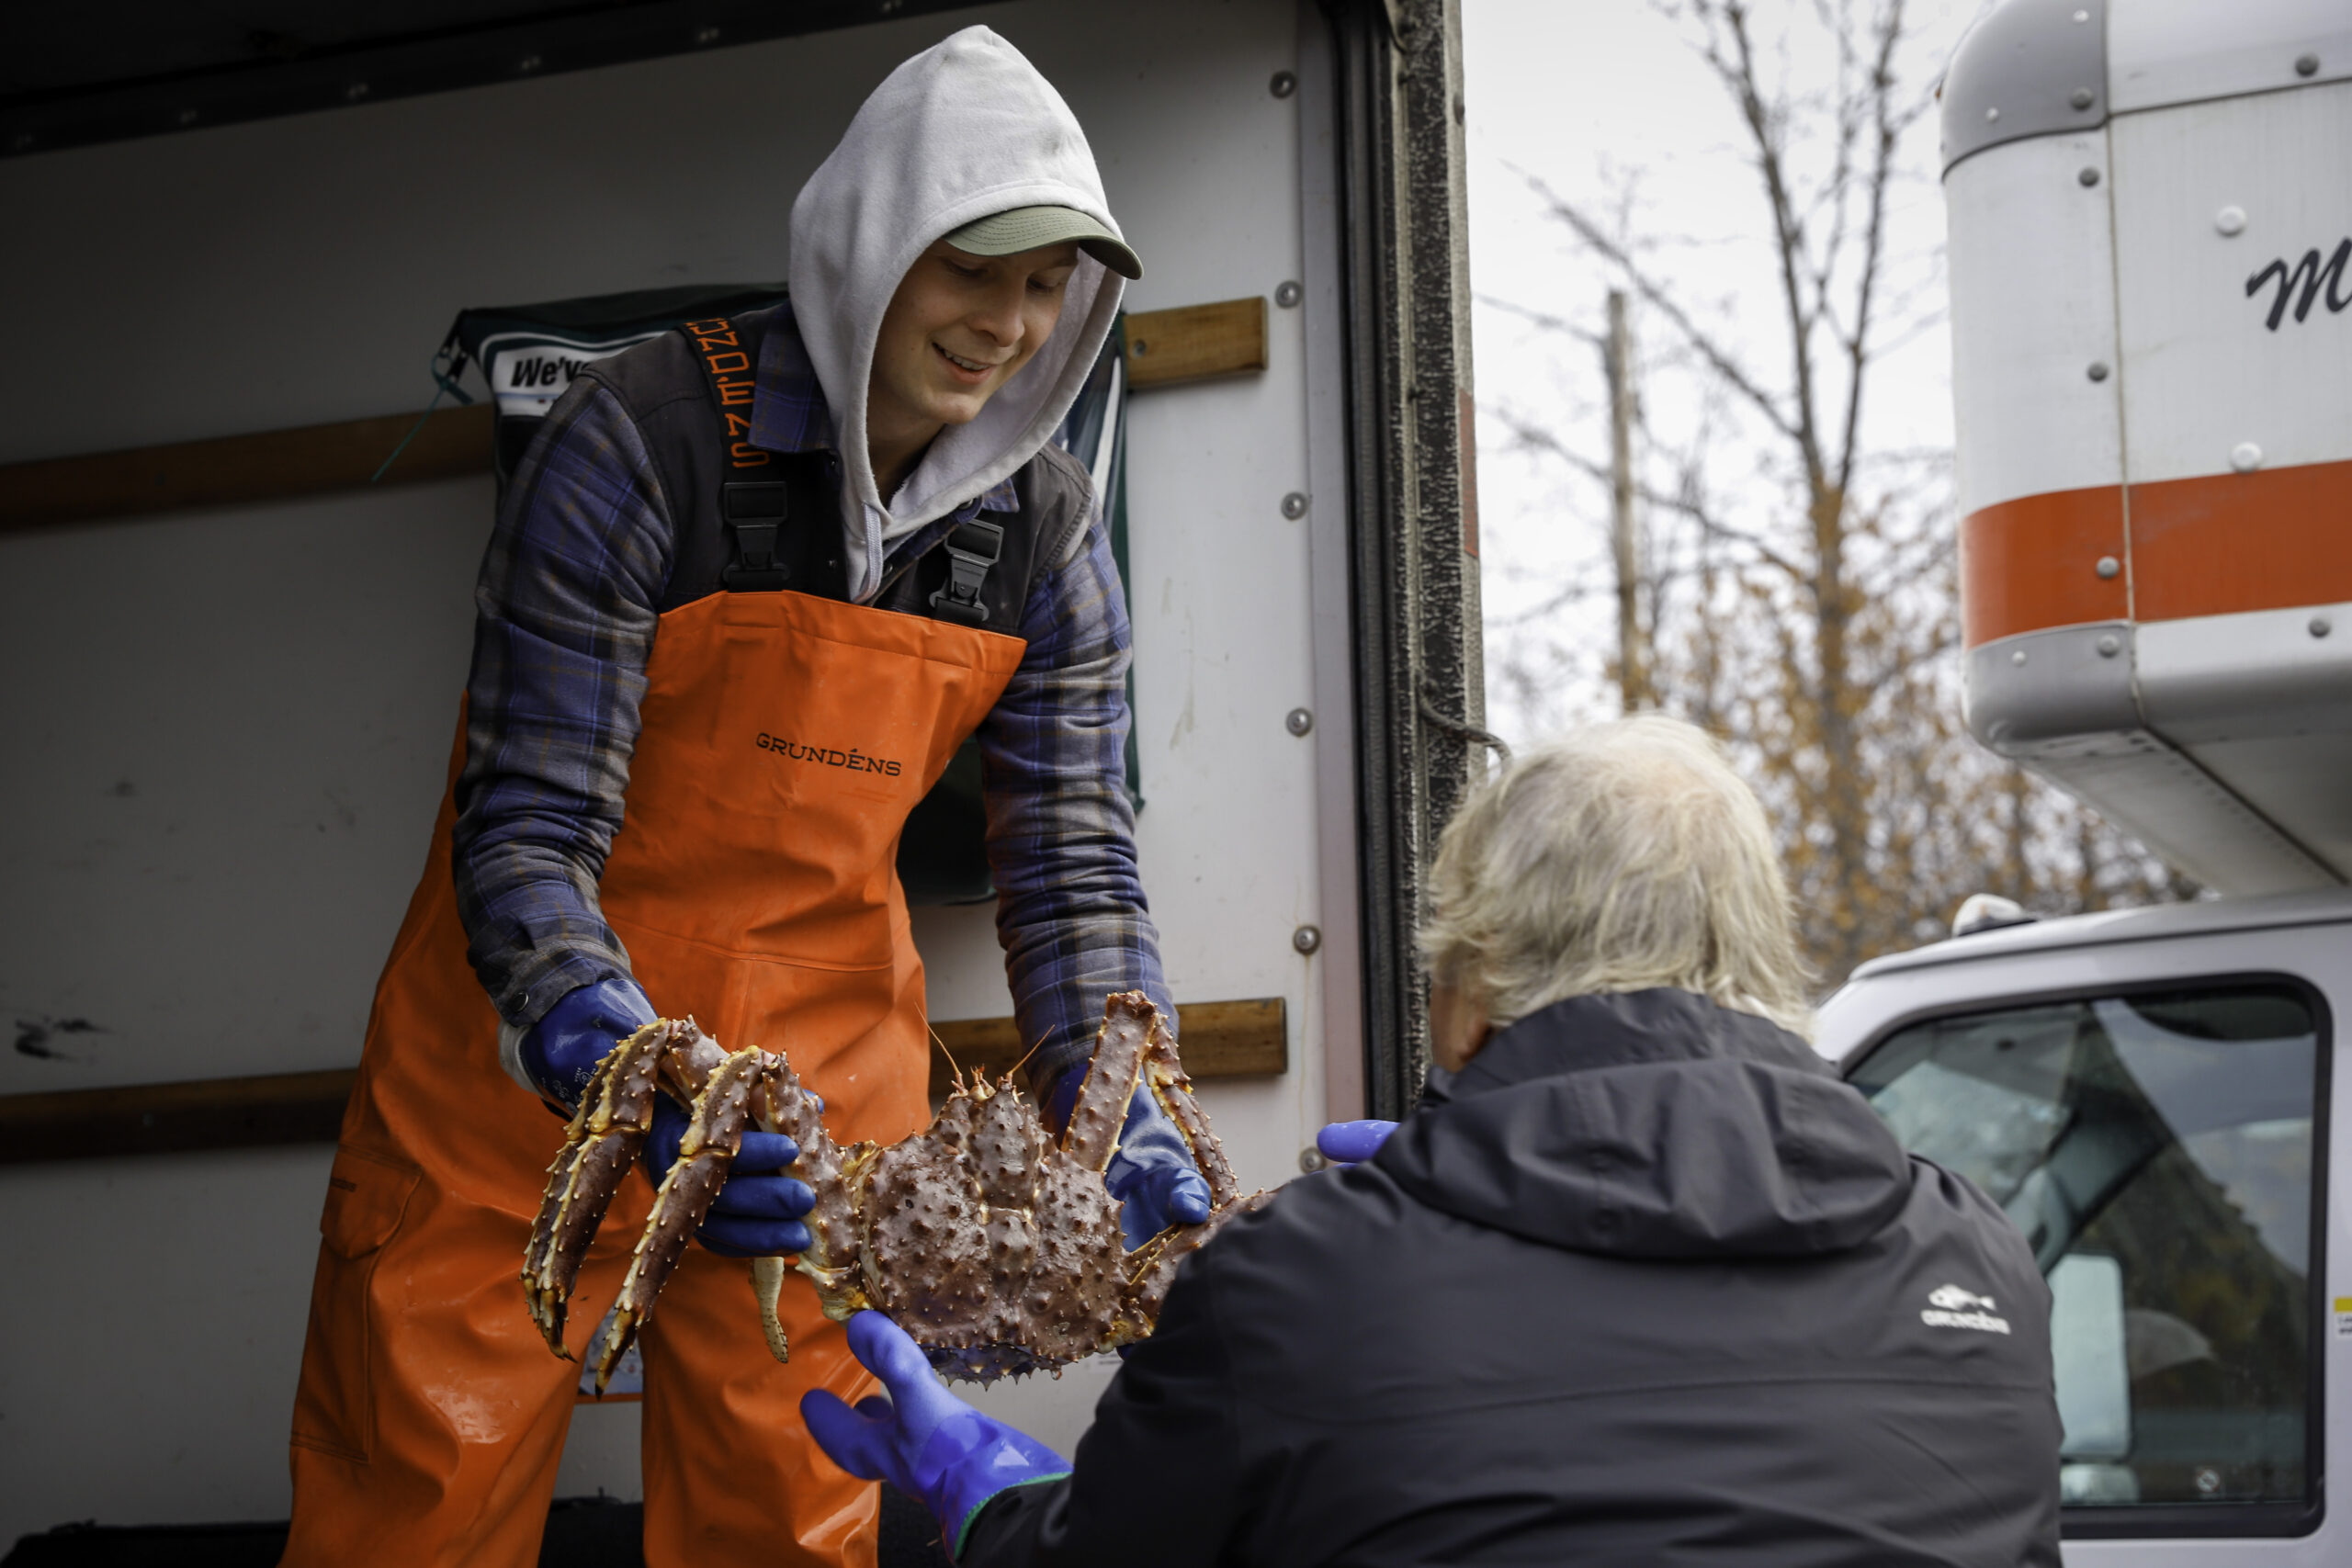 A man with orange waders and a hoodie hands over a live crab to an old man